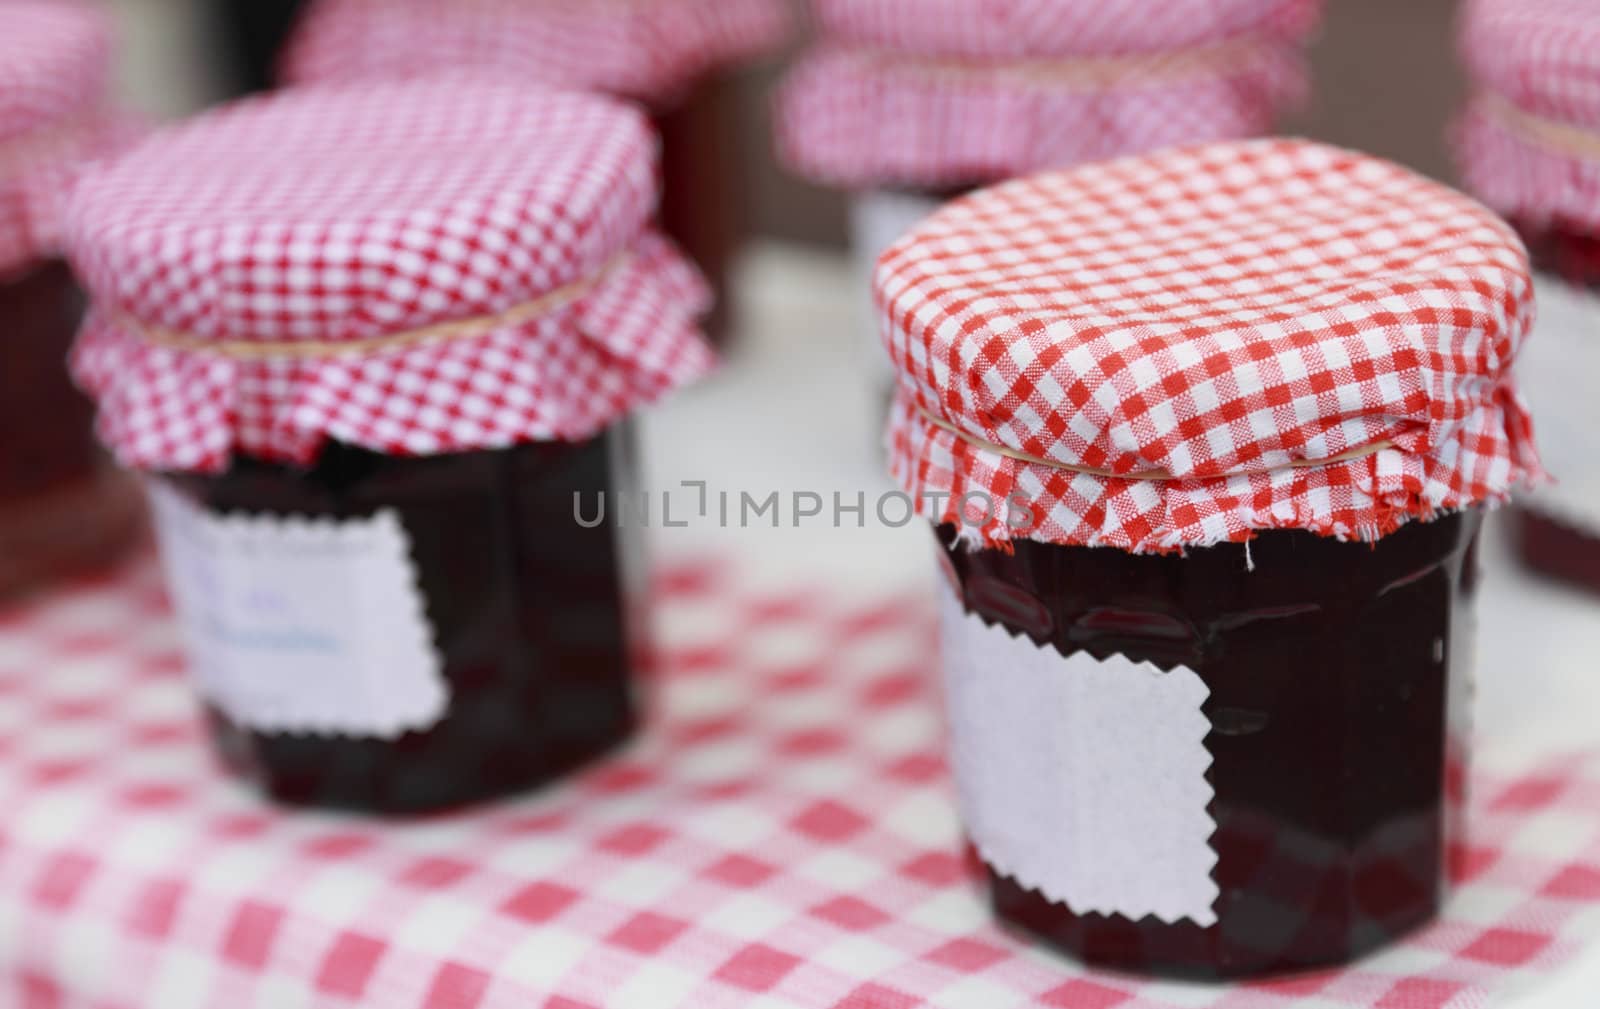 Image of jars of savoury old-fashined homemade jam on a table.